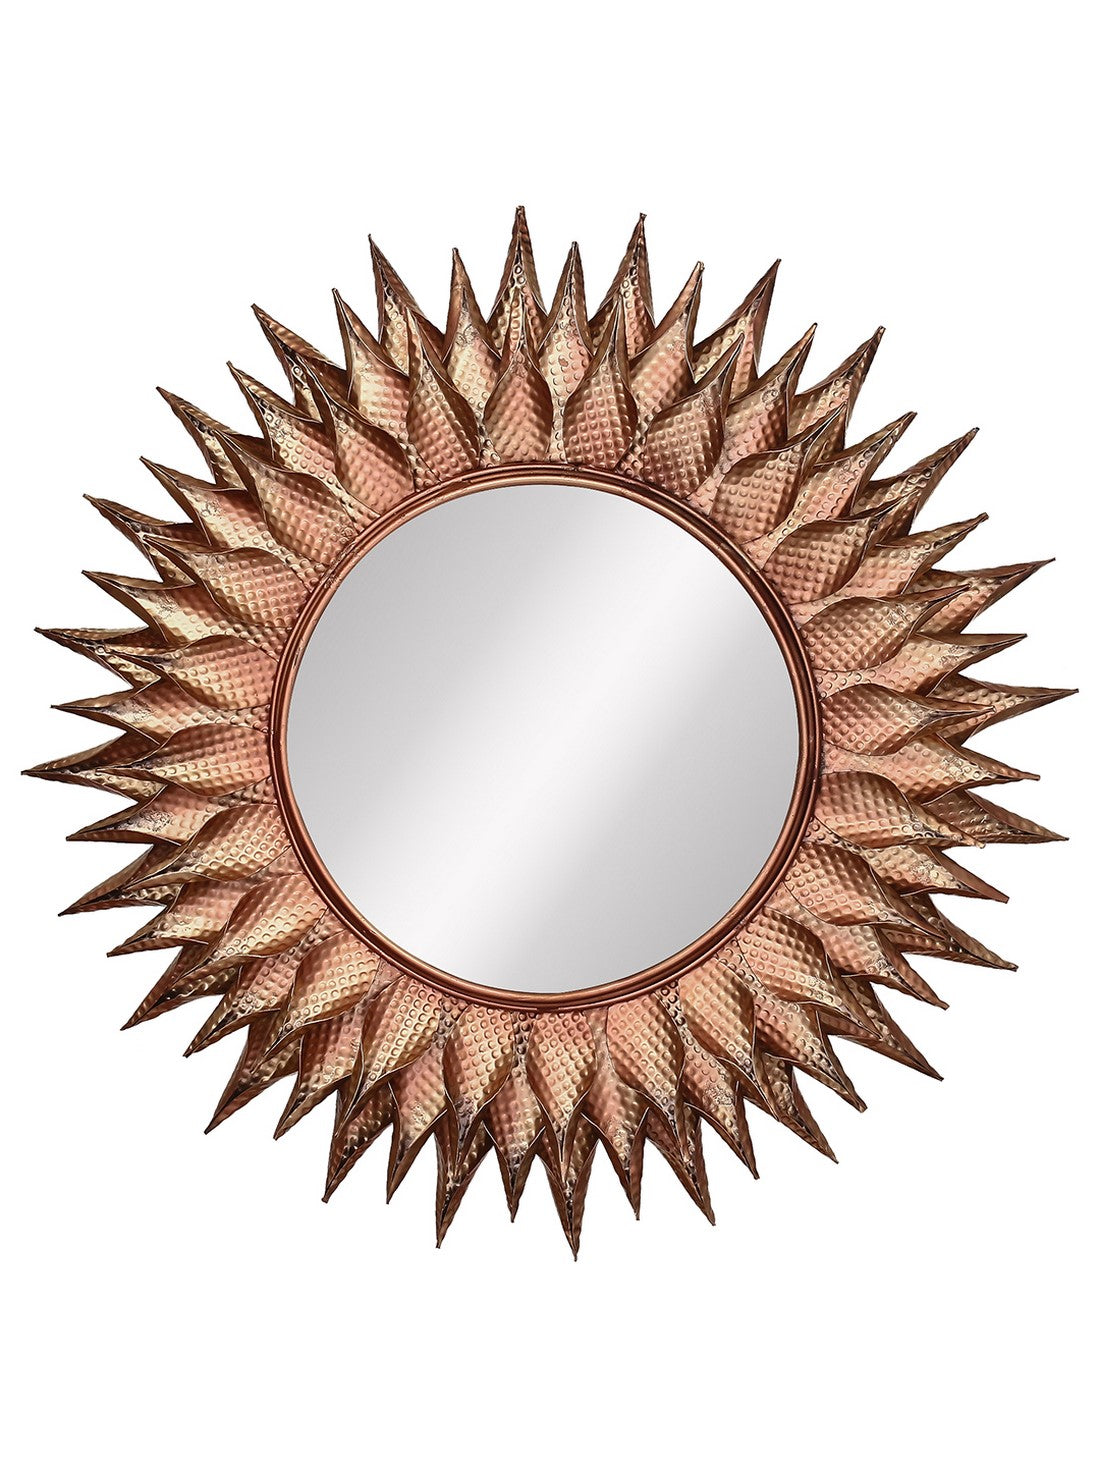 Copper Decorative Metal Handcarved Wall Mirror 1